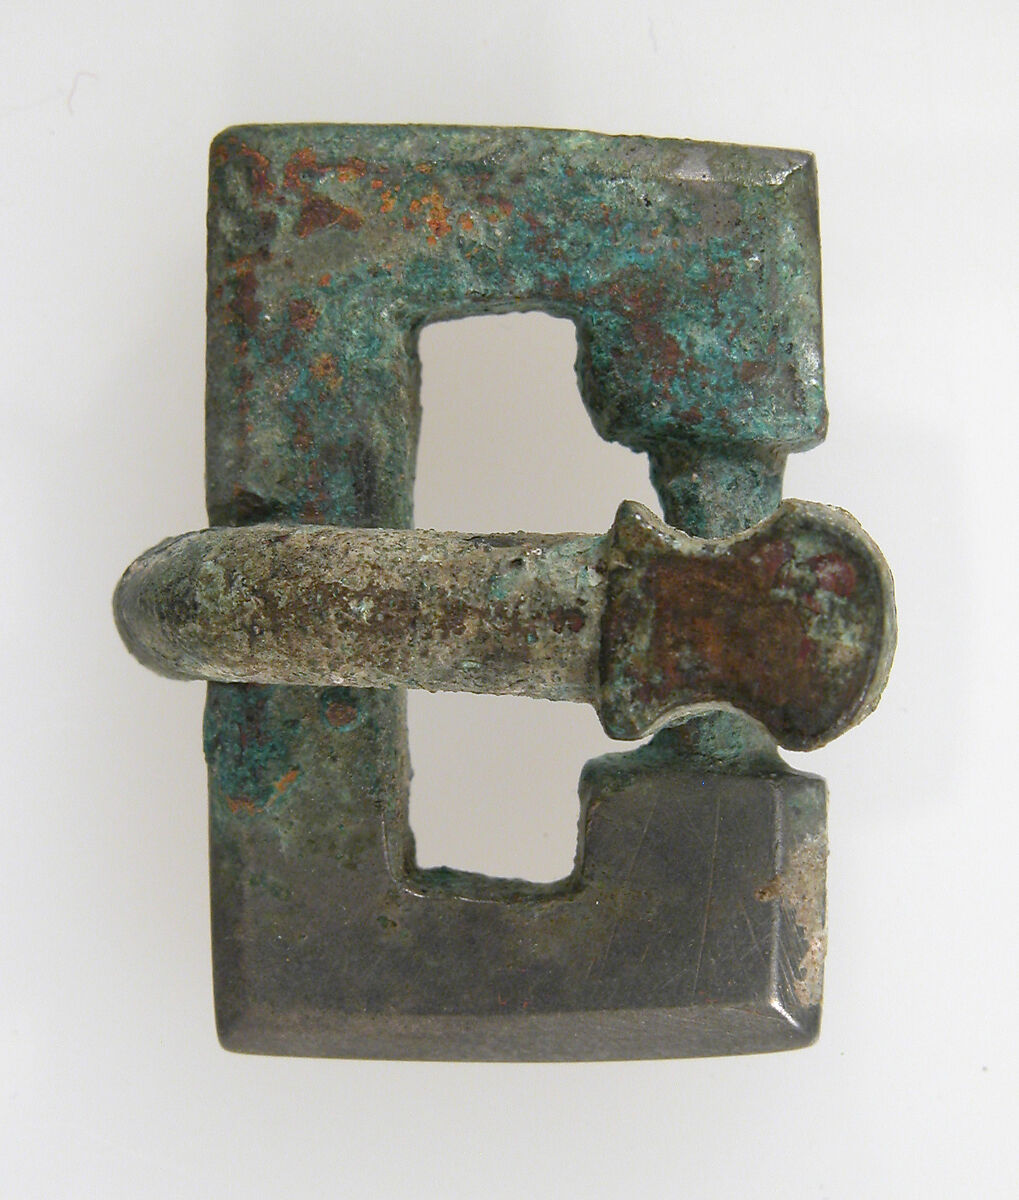 Belt Tongue and Rectangular Loop from a Buckle, Silver, Frankish 